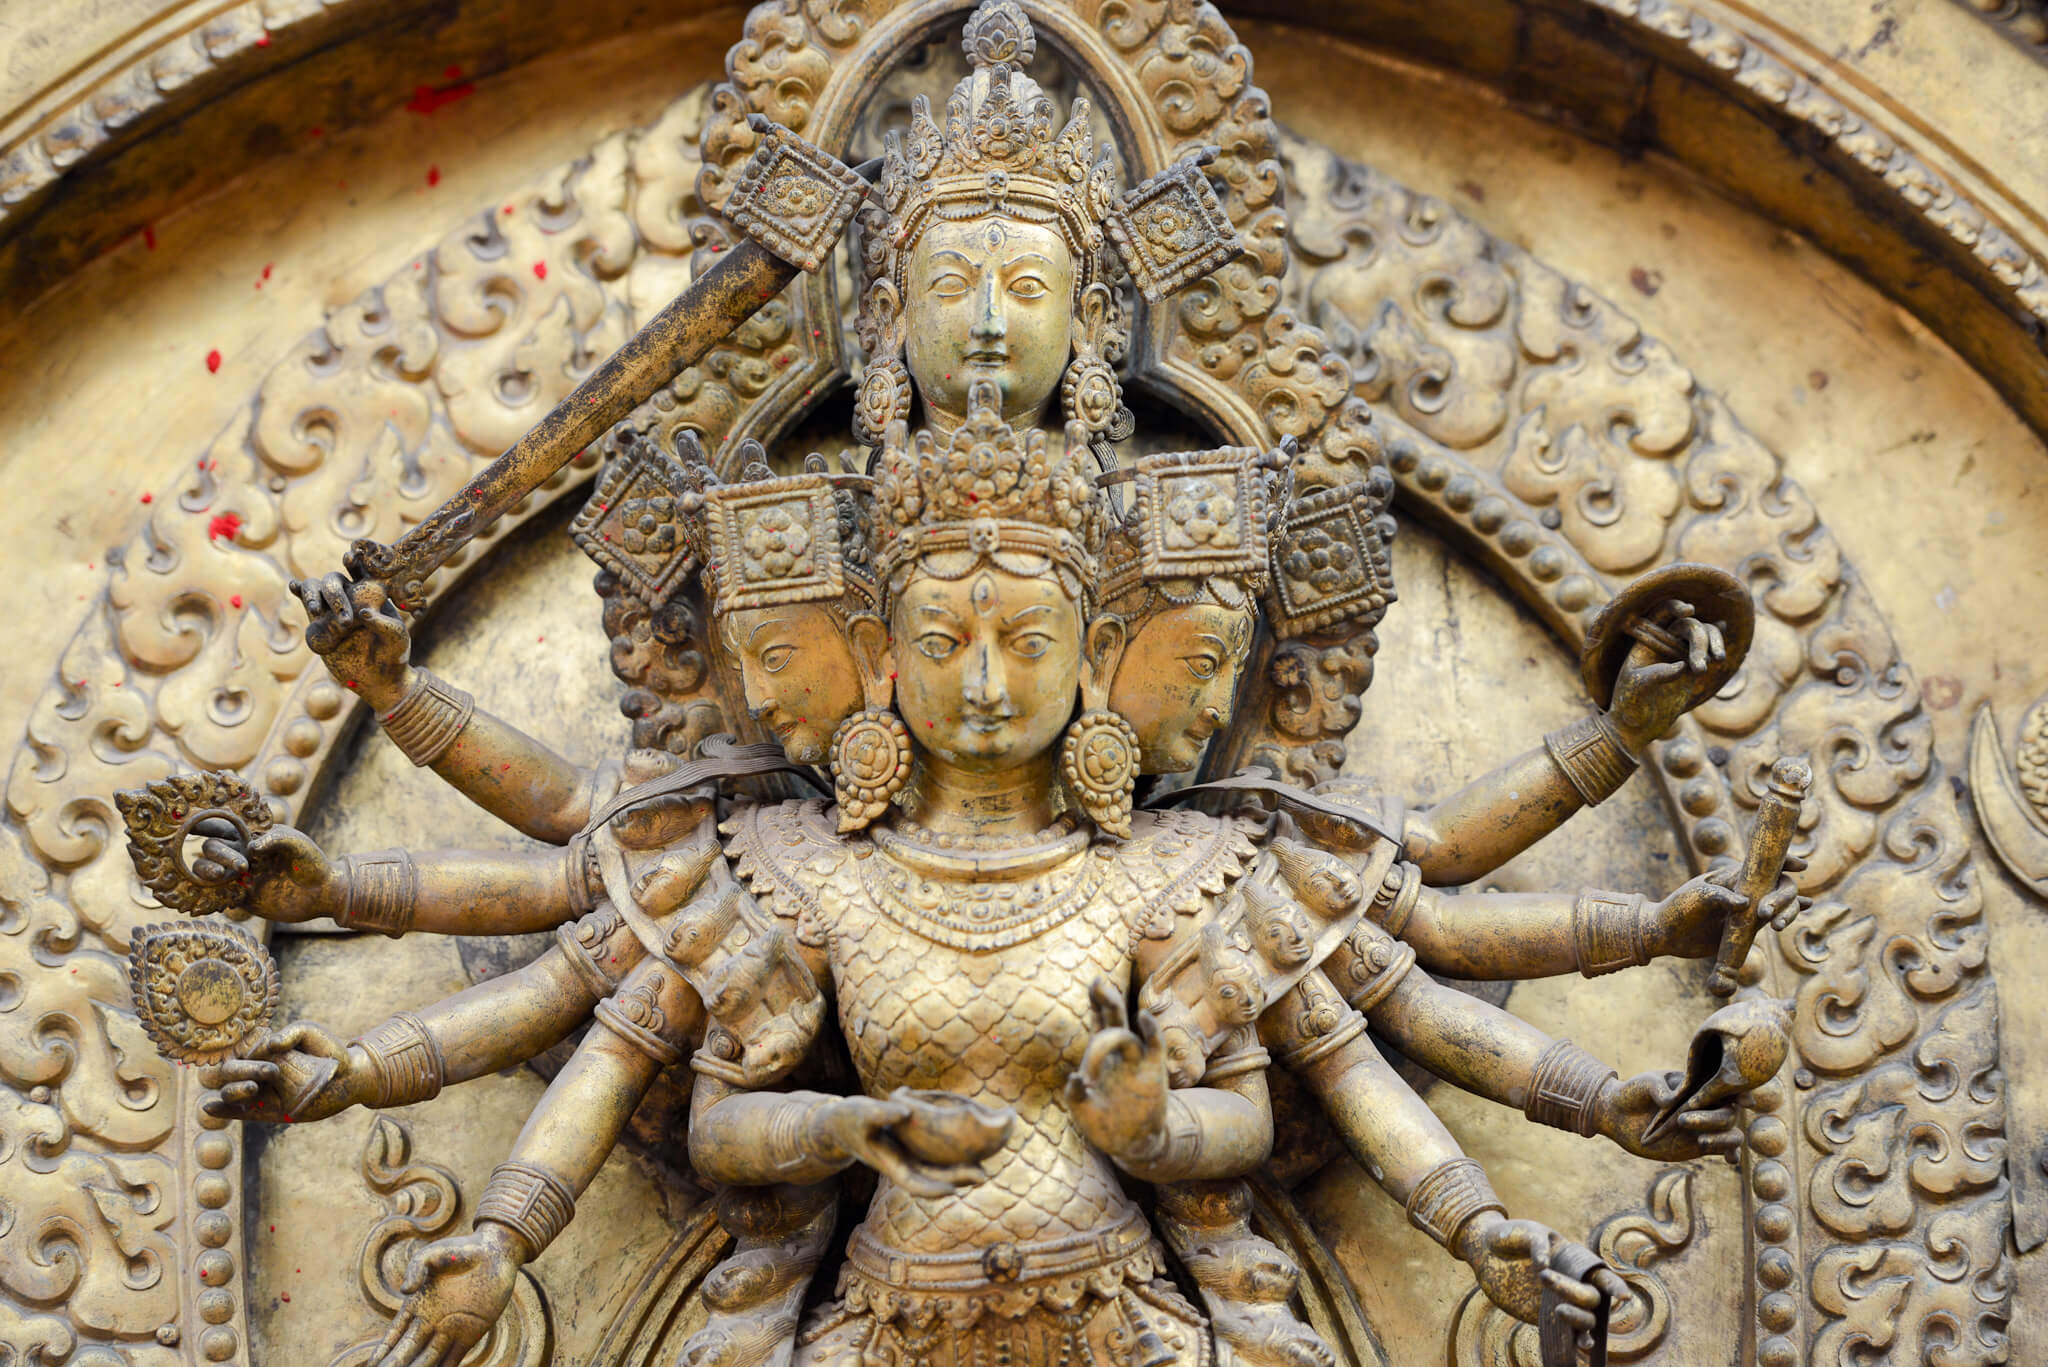 Devi Taleju Bhawani (with 10 arms standing on a lotus) adorns the Golden Gate in Bhaktapur Darbur Square, the main entrance to the Kumari temple. Built in 1753 by King Ranjit Malla.